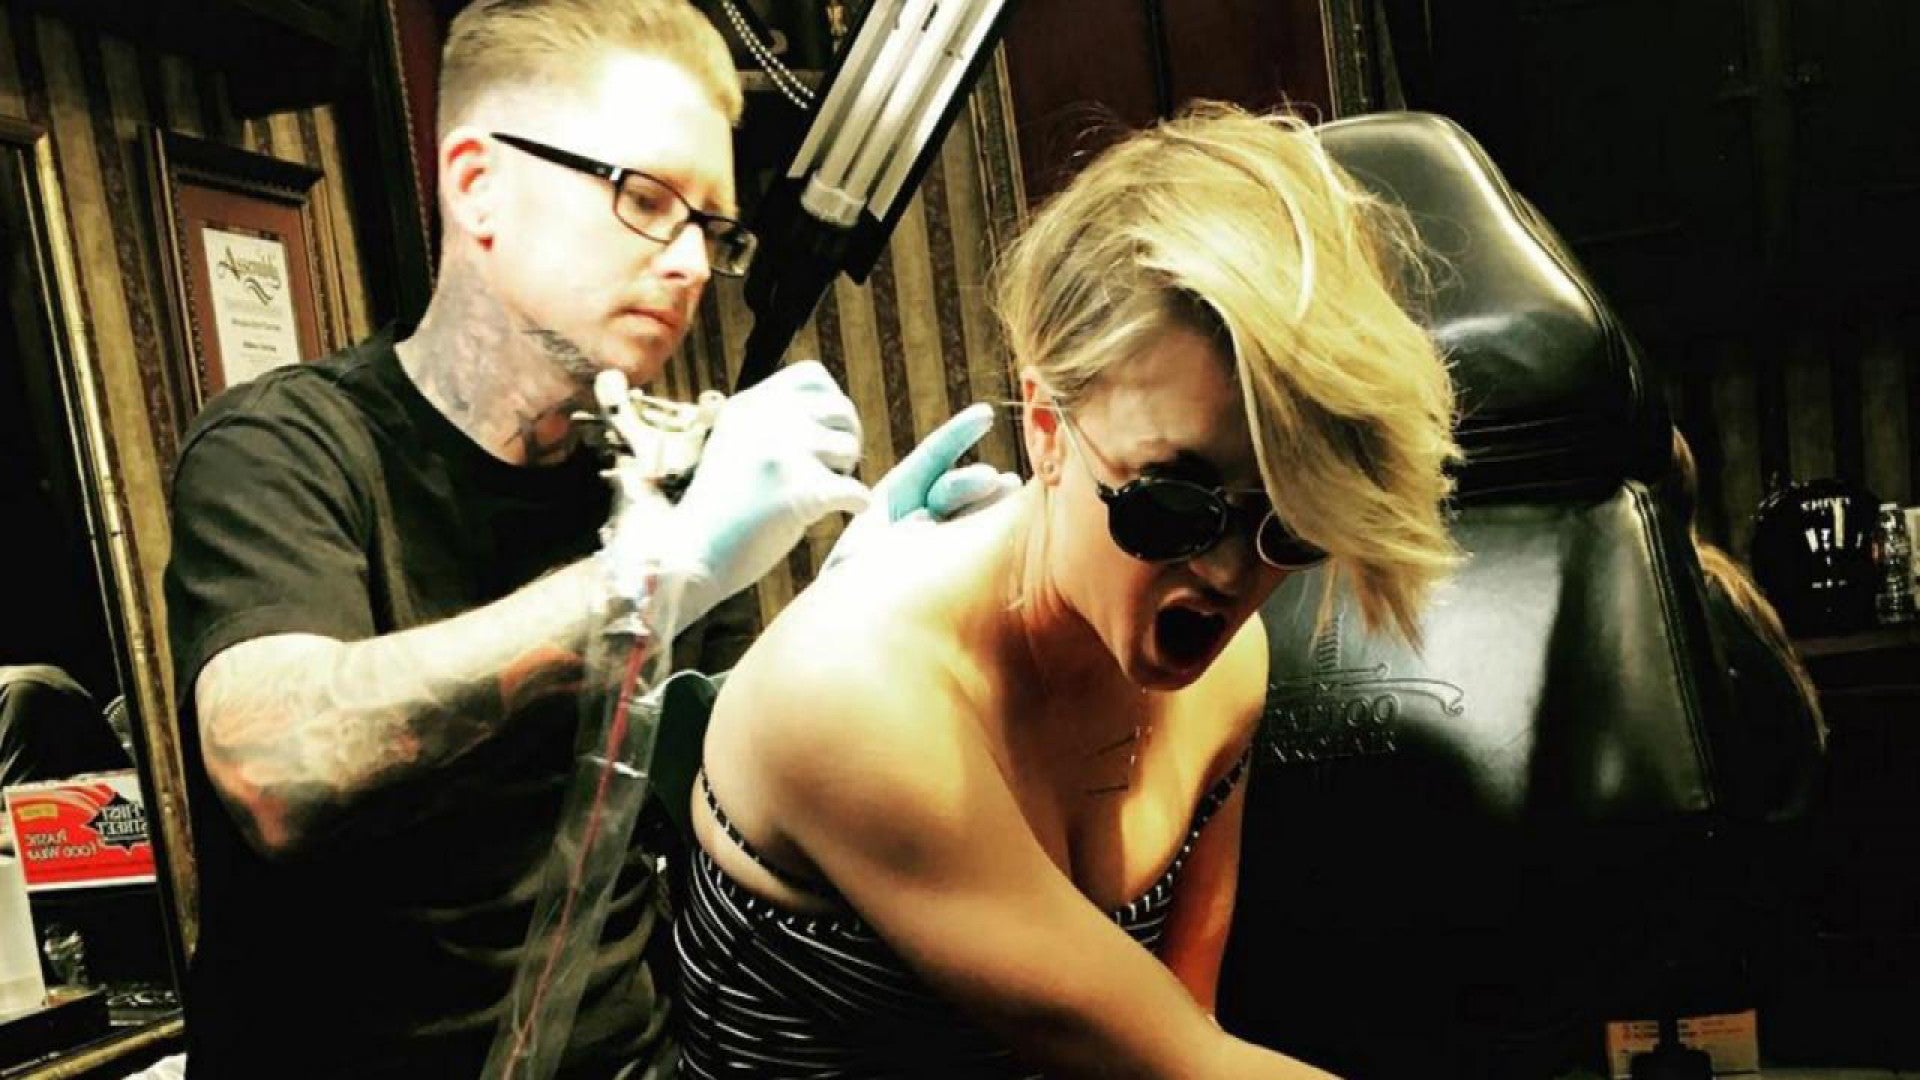 Kaley Cuoco Covers Marriage Tattoo Do Not Mark Your Body With Any Future Wedding Dates Entertainment Tonight Cuoco has 3 tattoos as of yet. kaley cuoco covers up wedding date tattoo with a moth see the pic